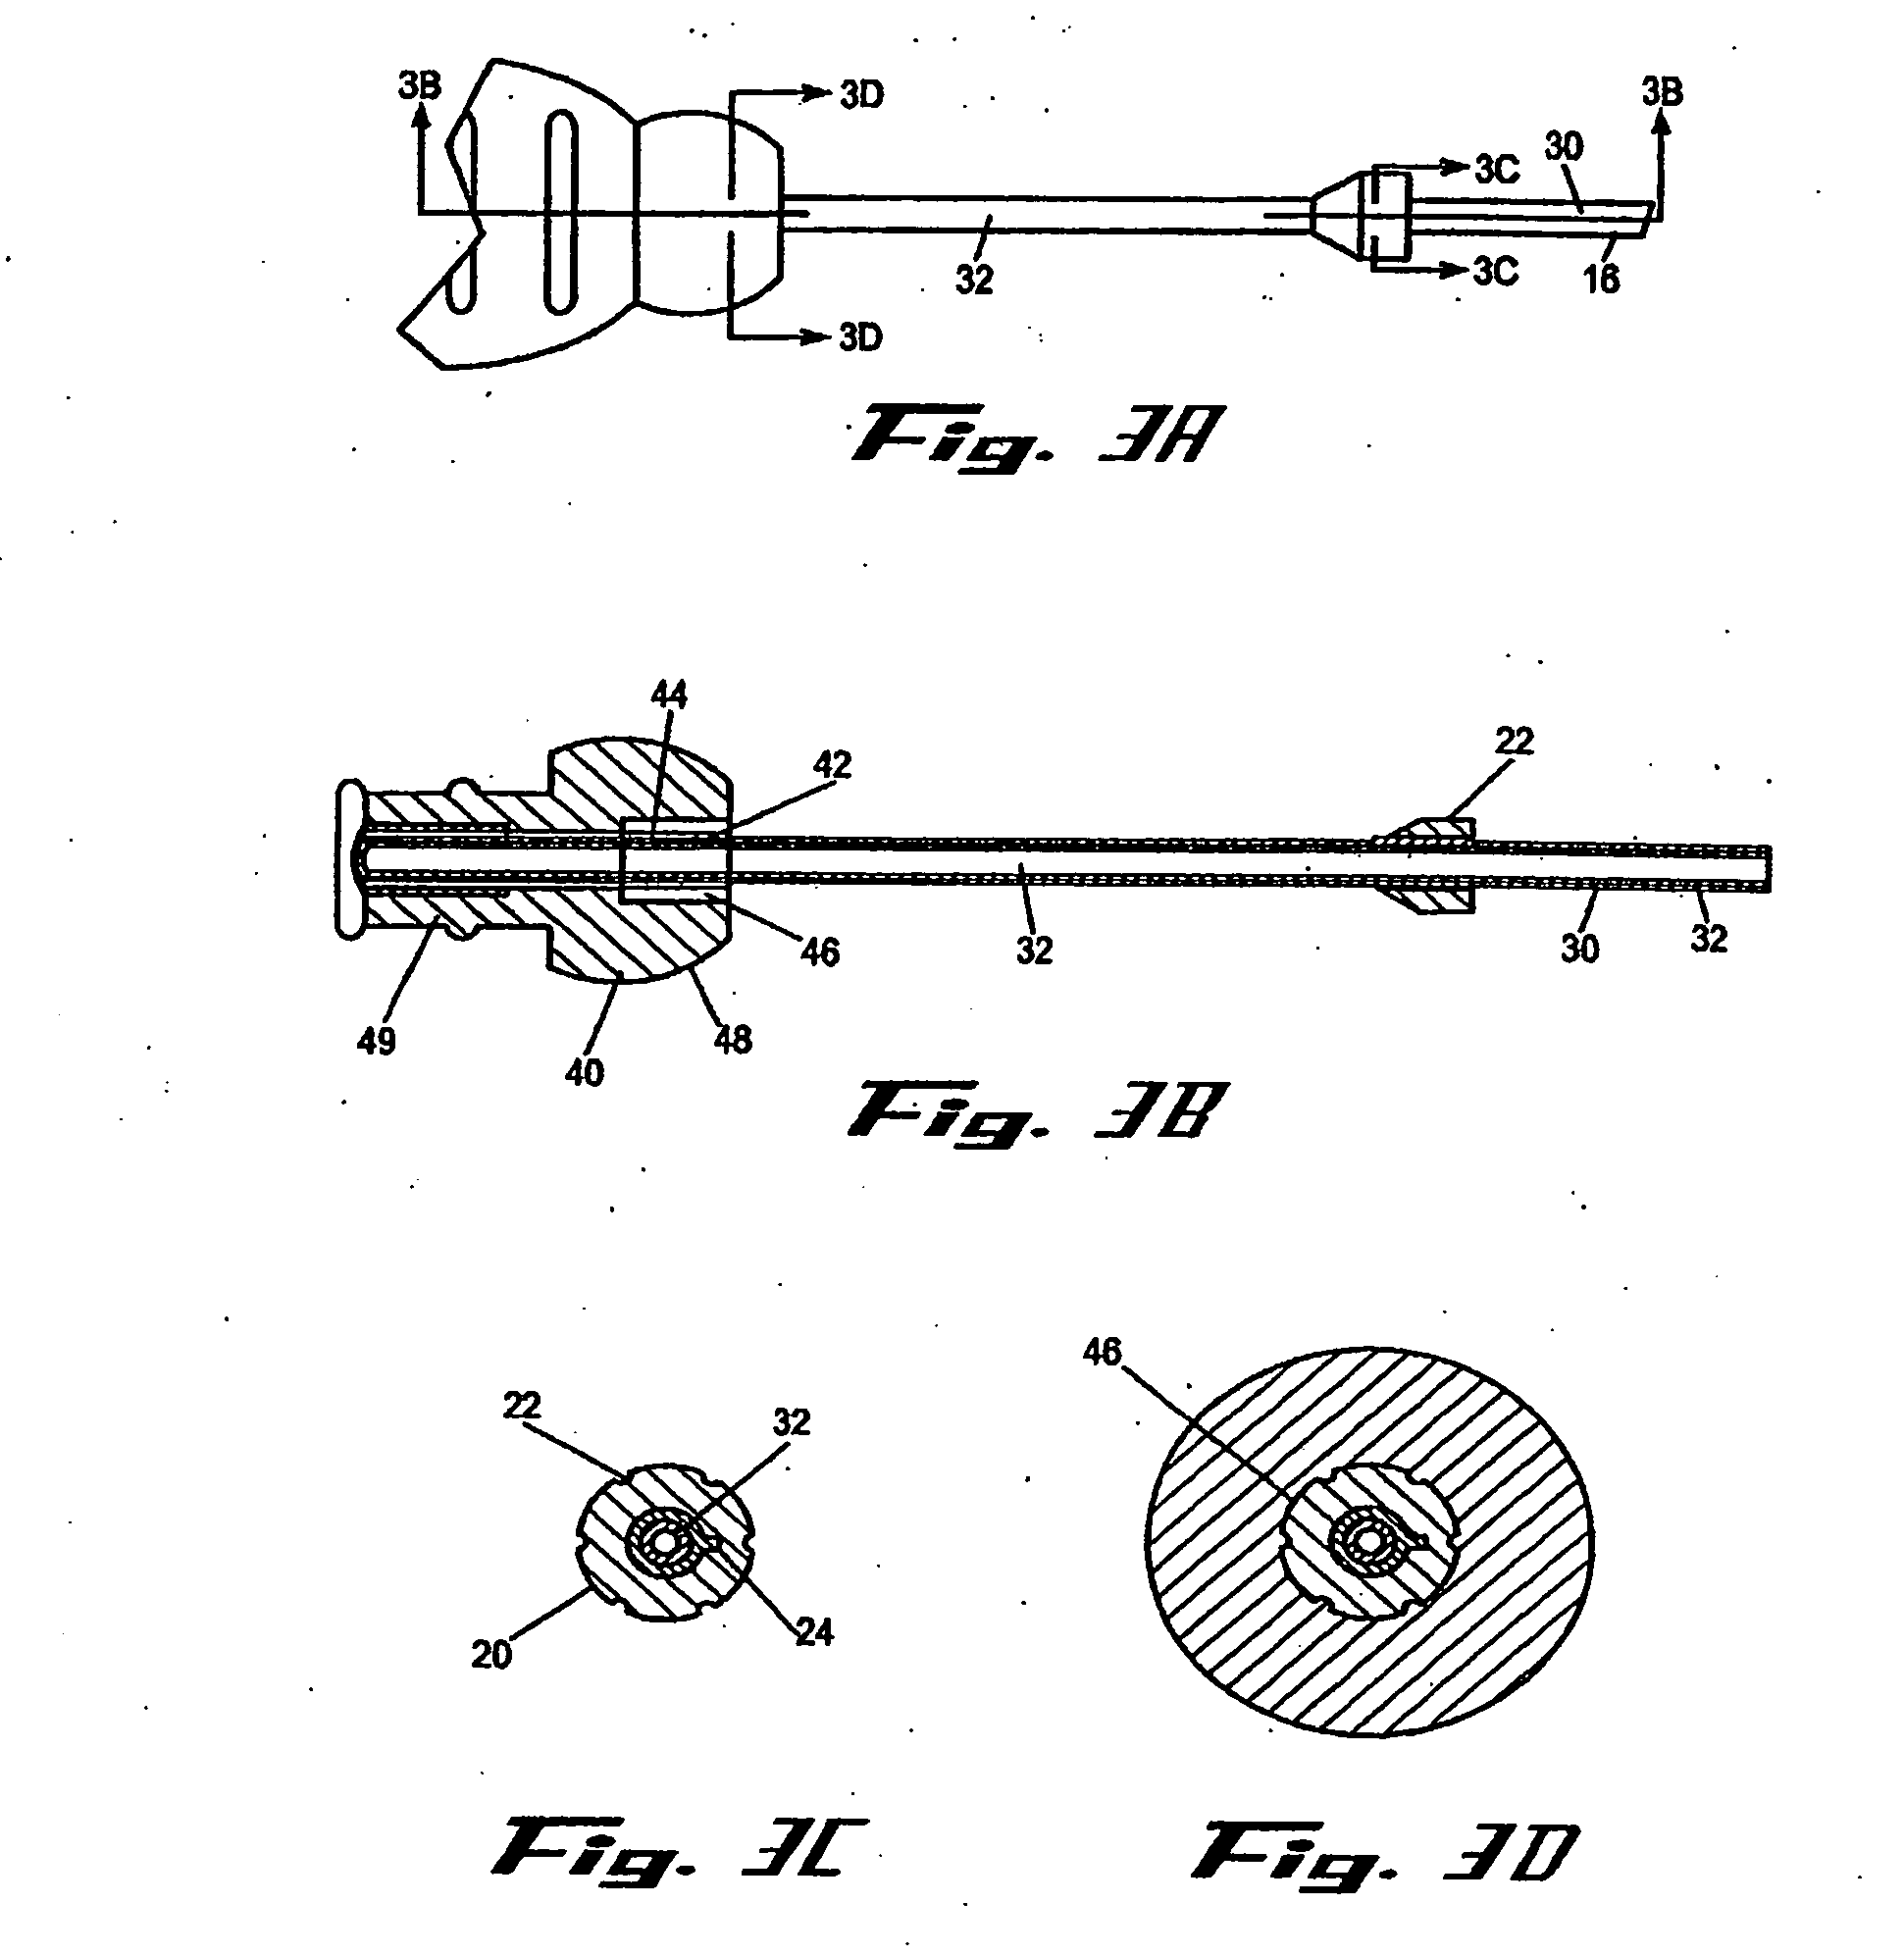 Medical appliance delivery apparatus and method of use